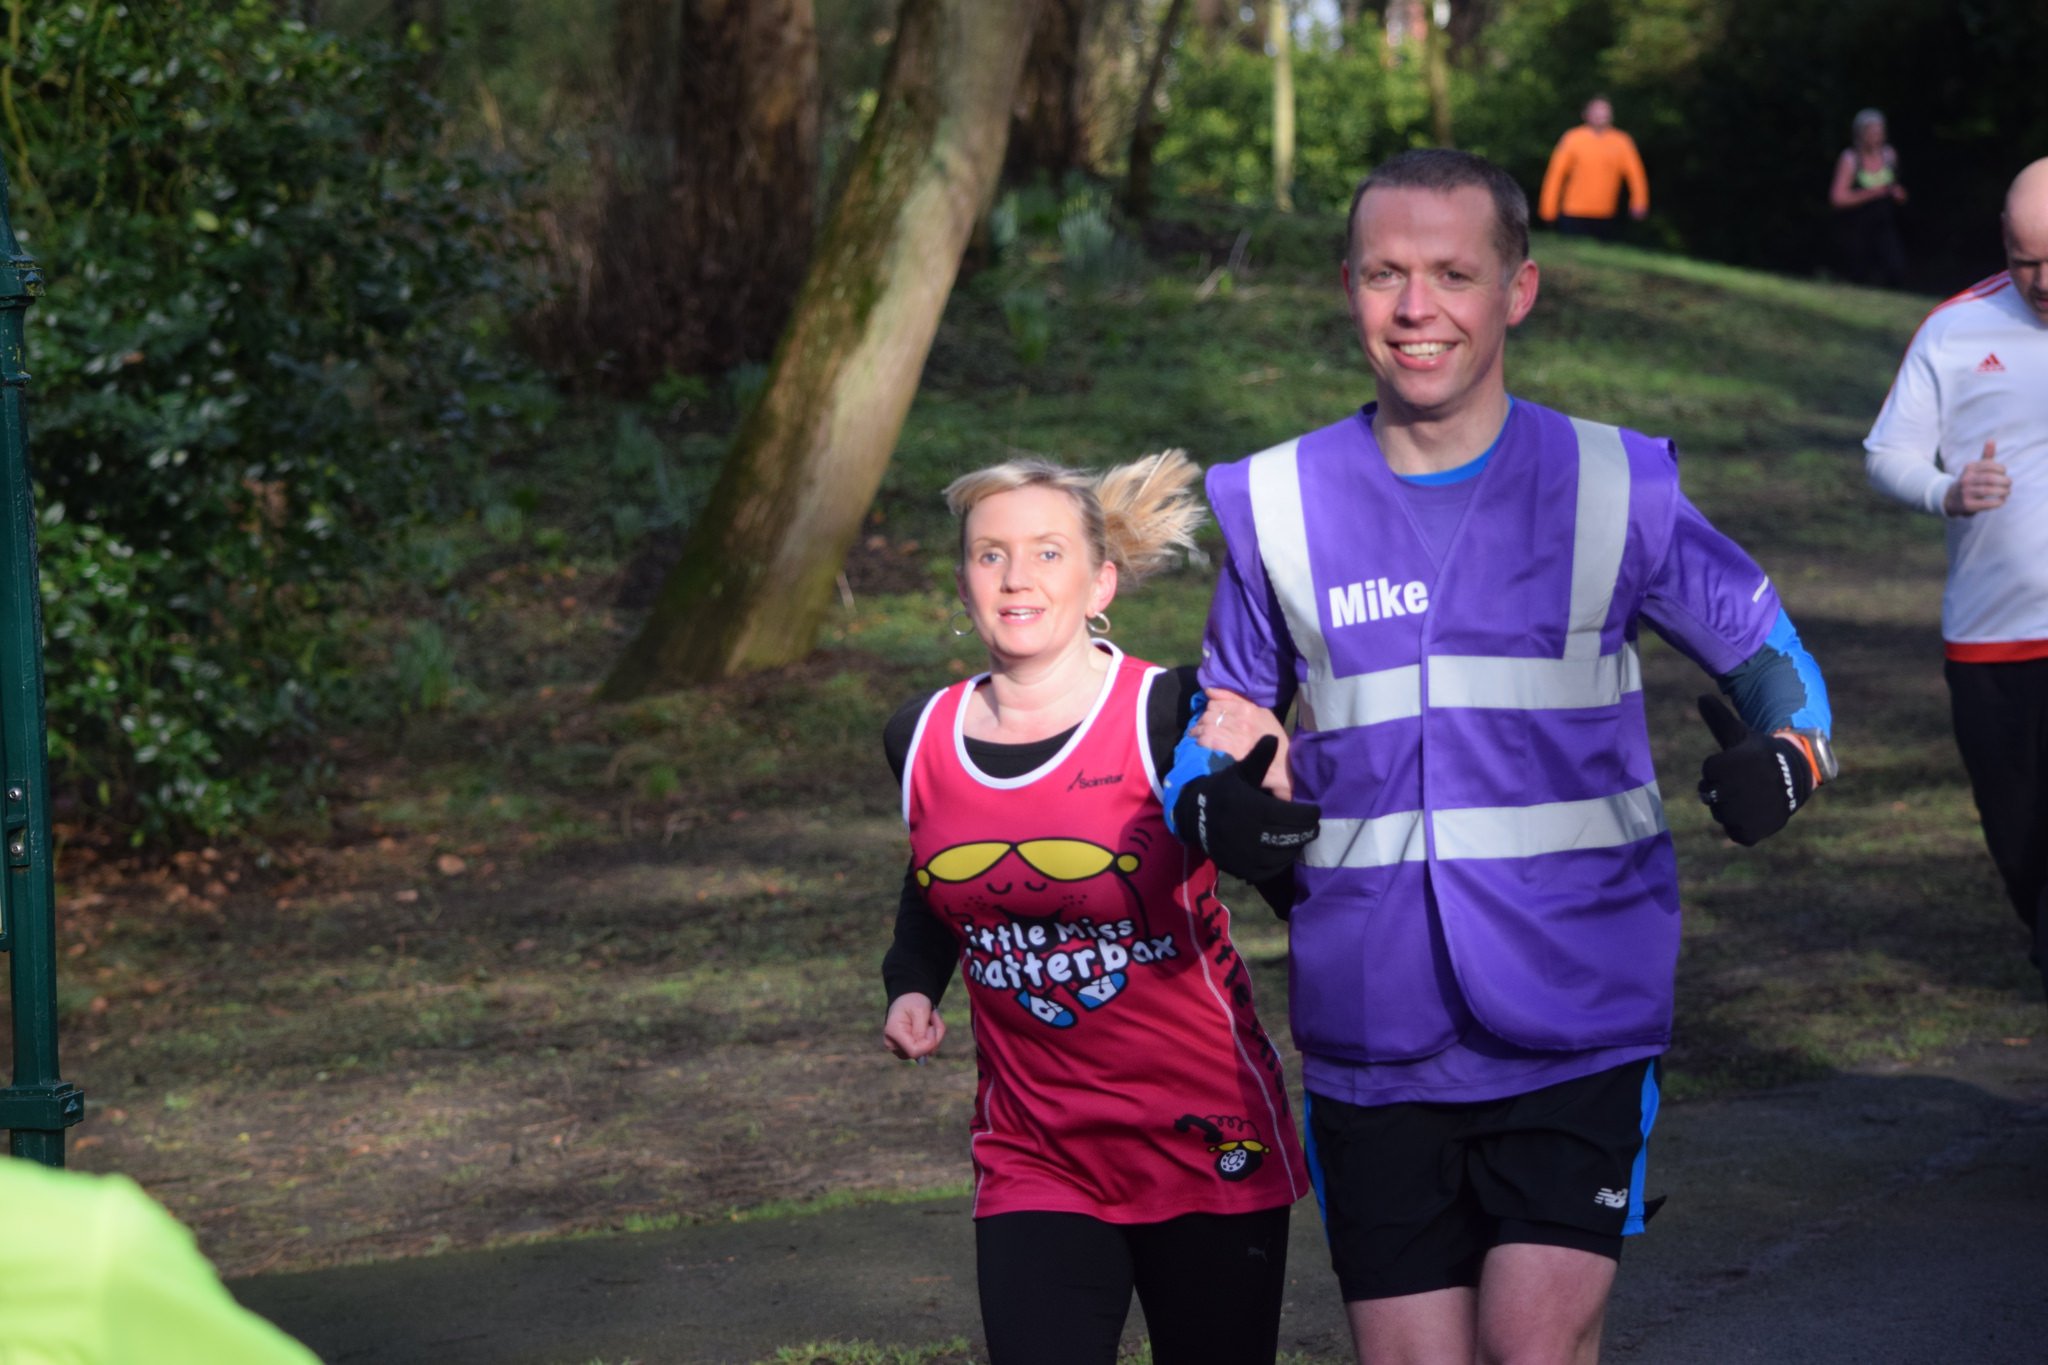 Kelly and Mike (guide) on a parkrun in Southport